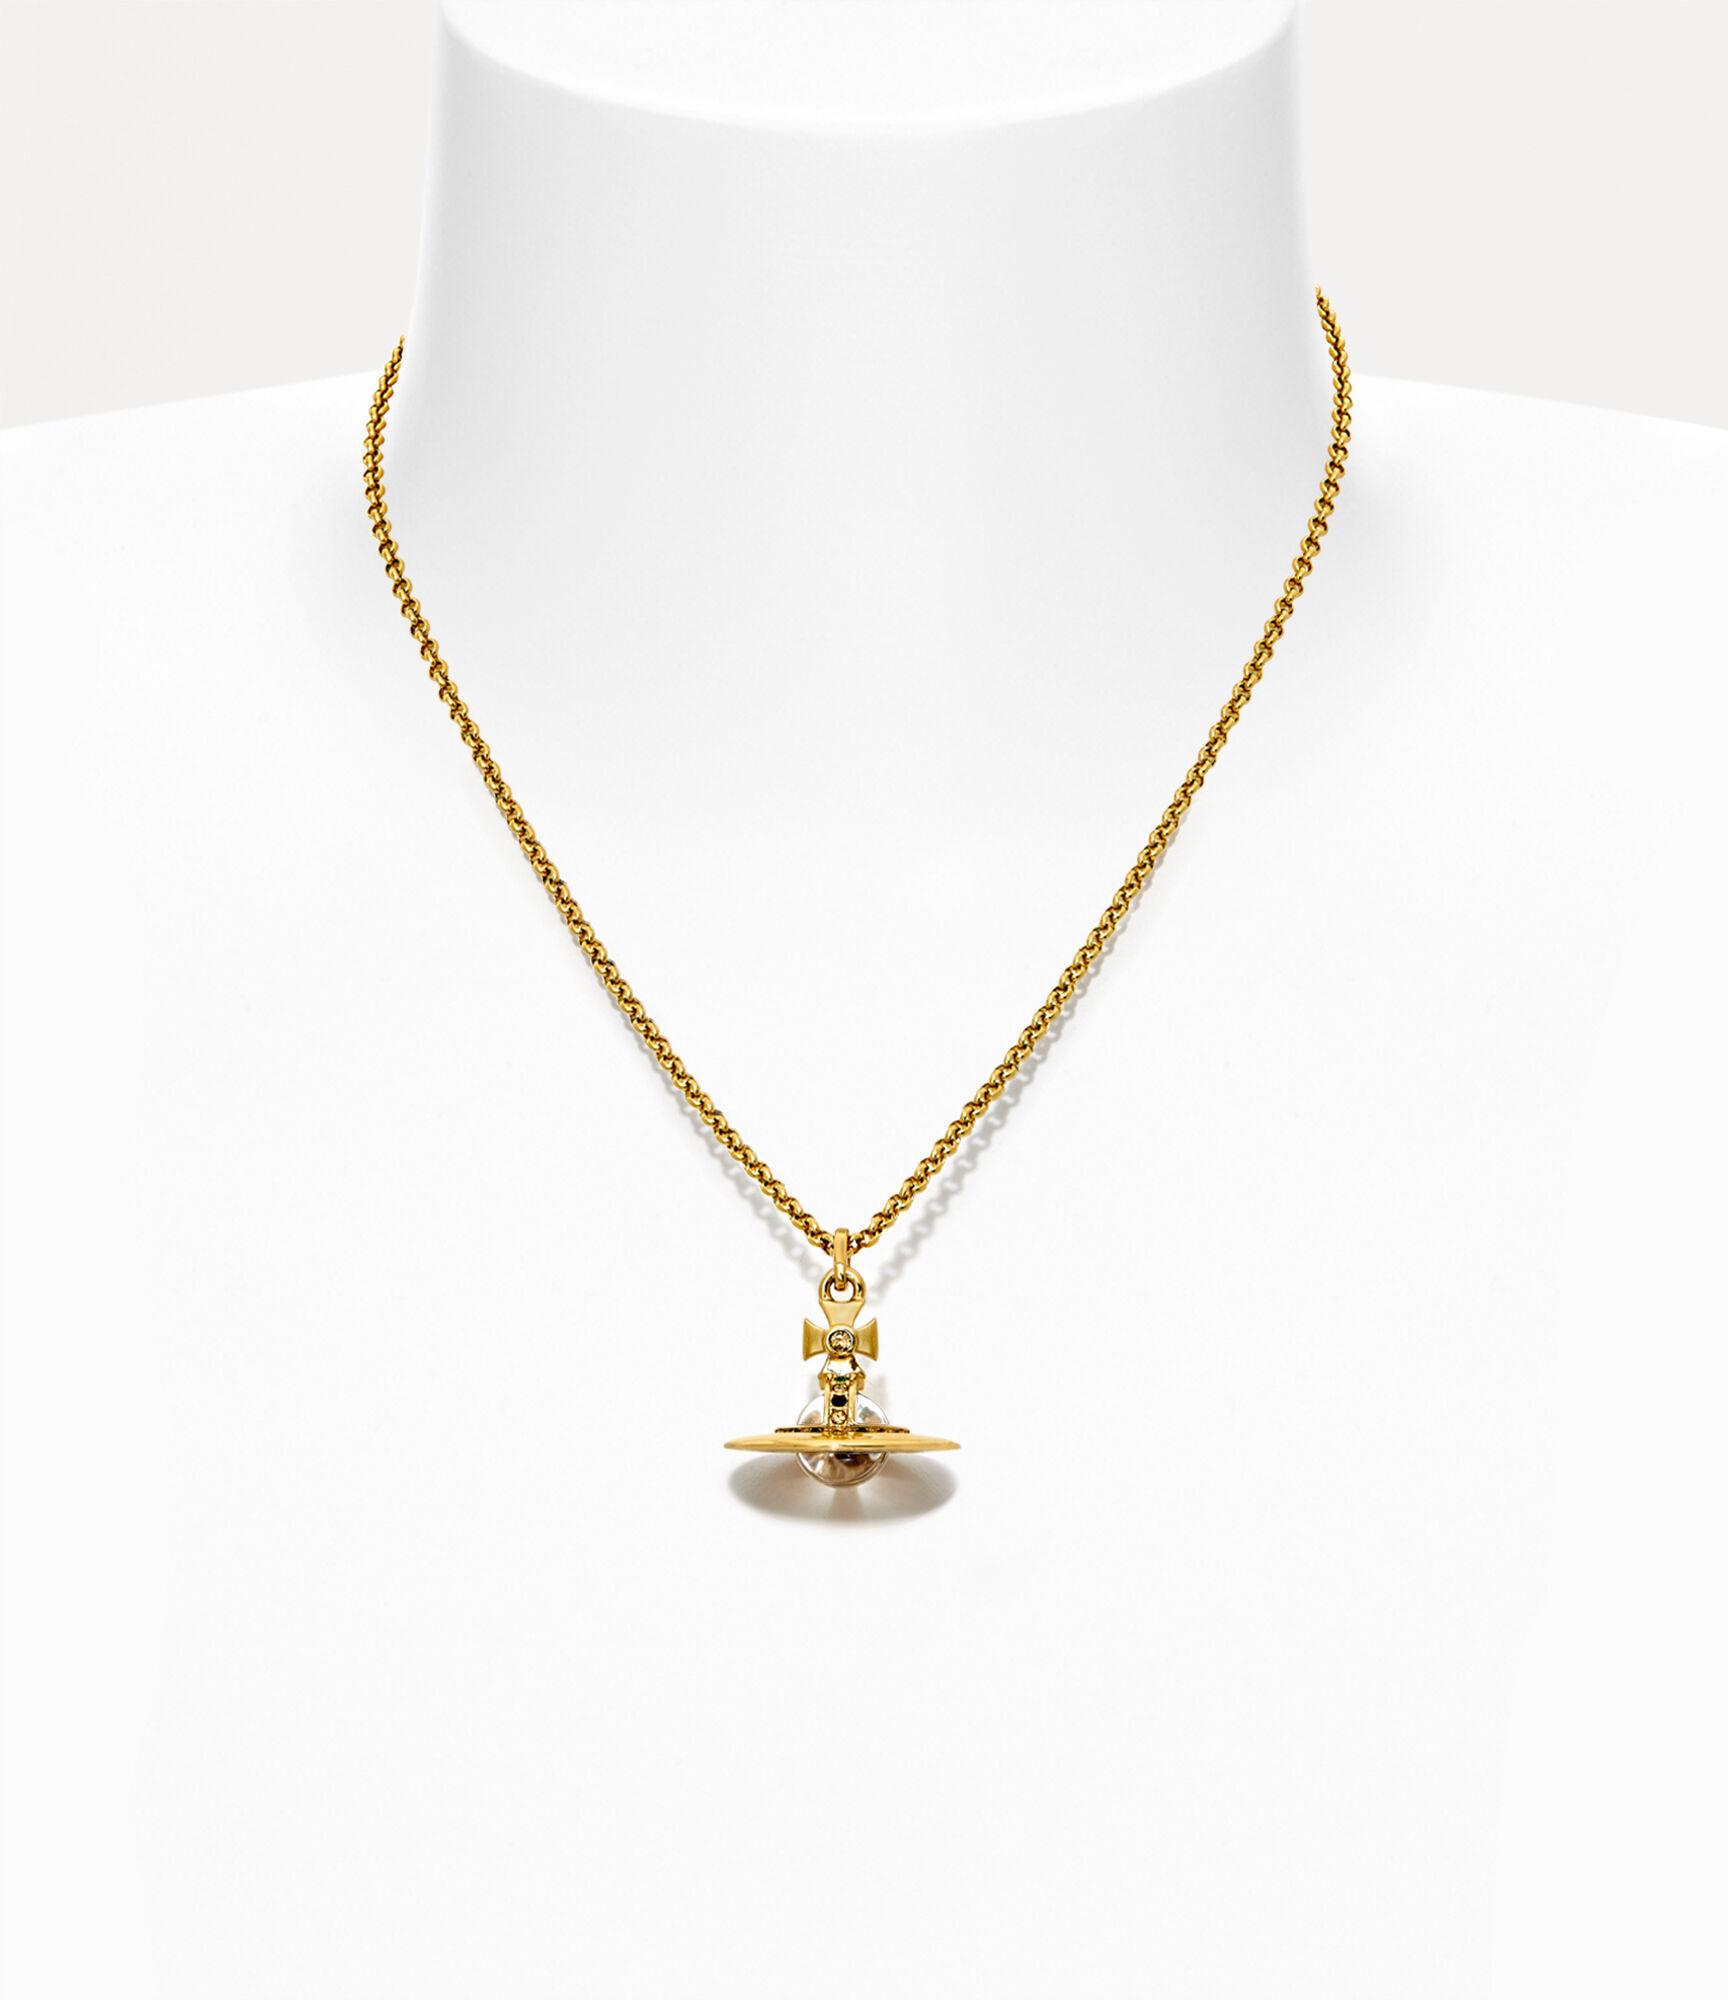 SALE爆買いVivienne Westwood TINY ORB ネックレス アクセサリー